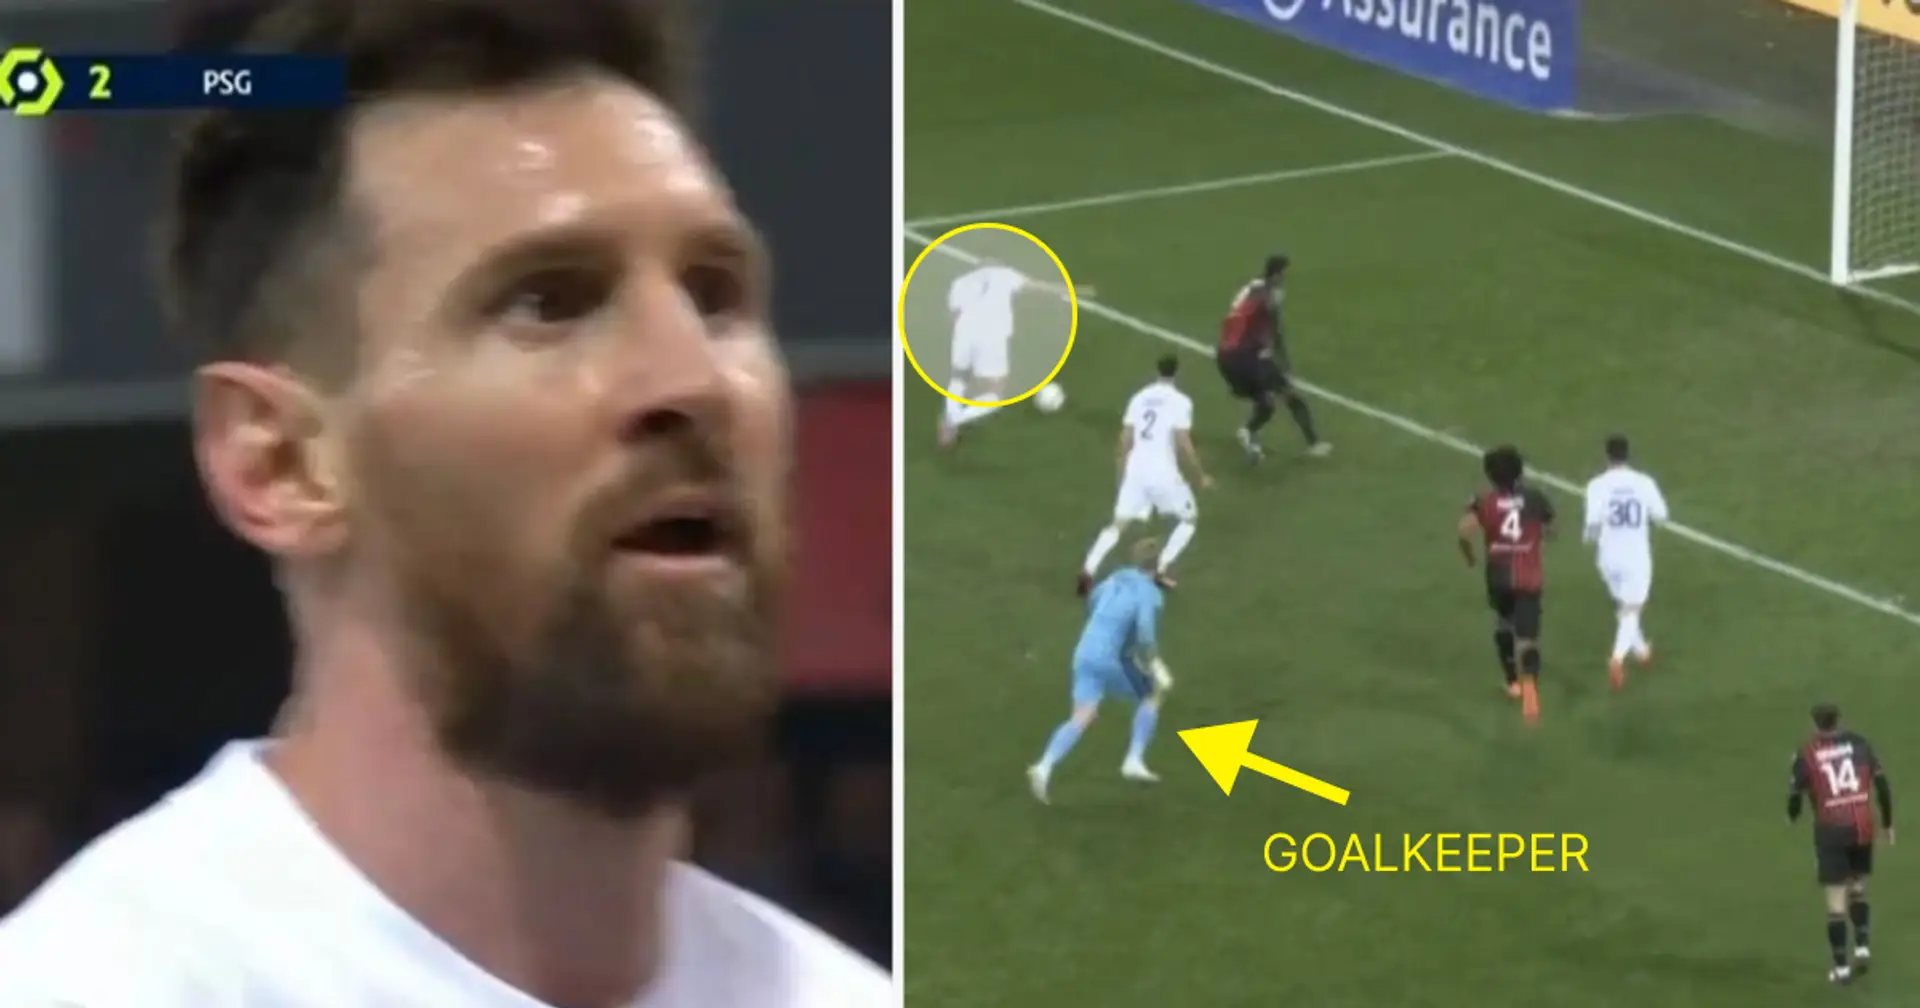 'Selfless to a fault': Messi sets Mbappe up for goal instead of finishing himself -- Frenchman misses